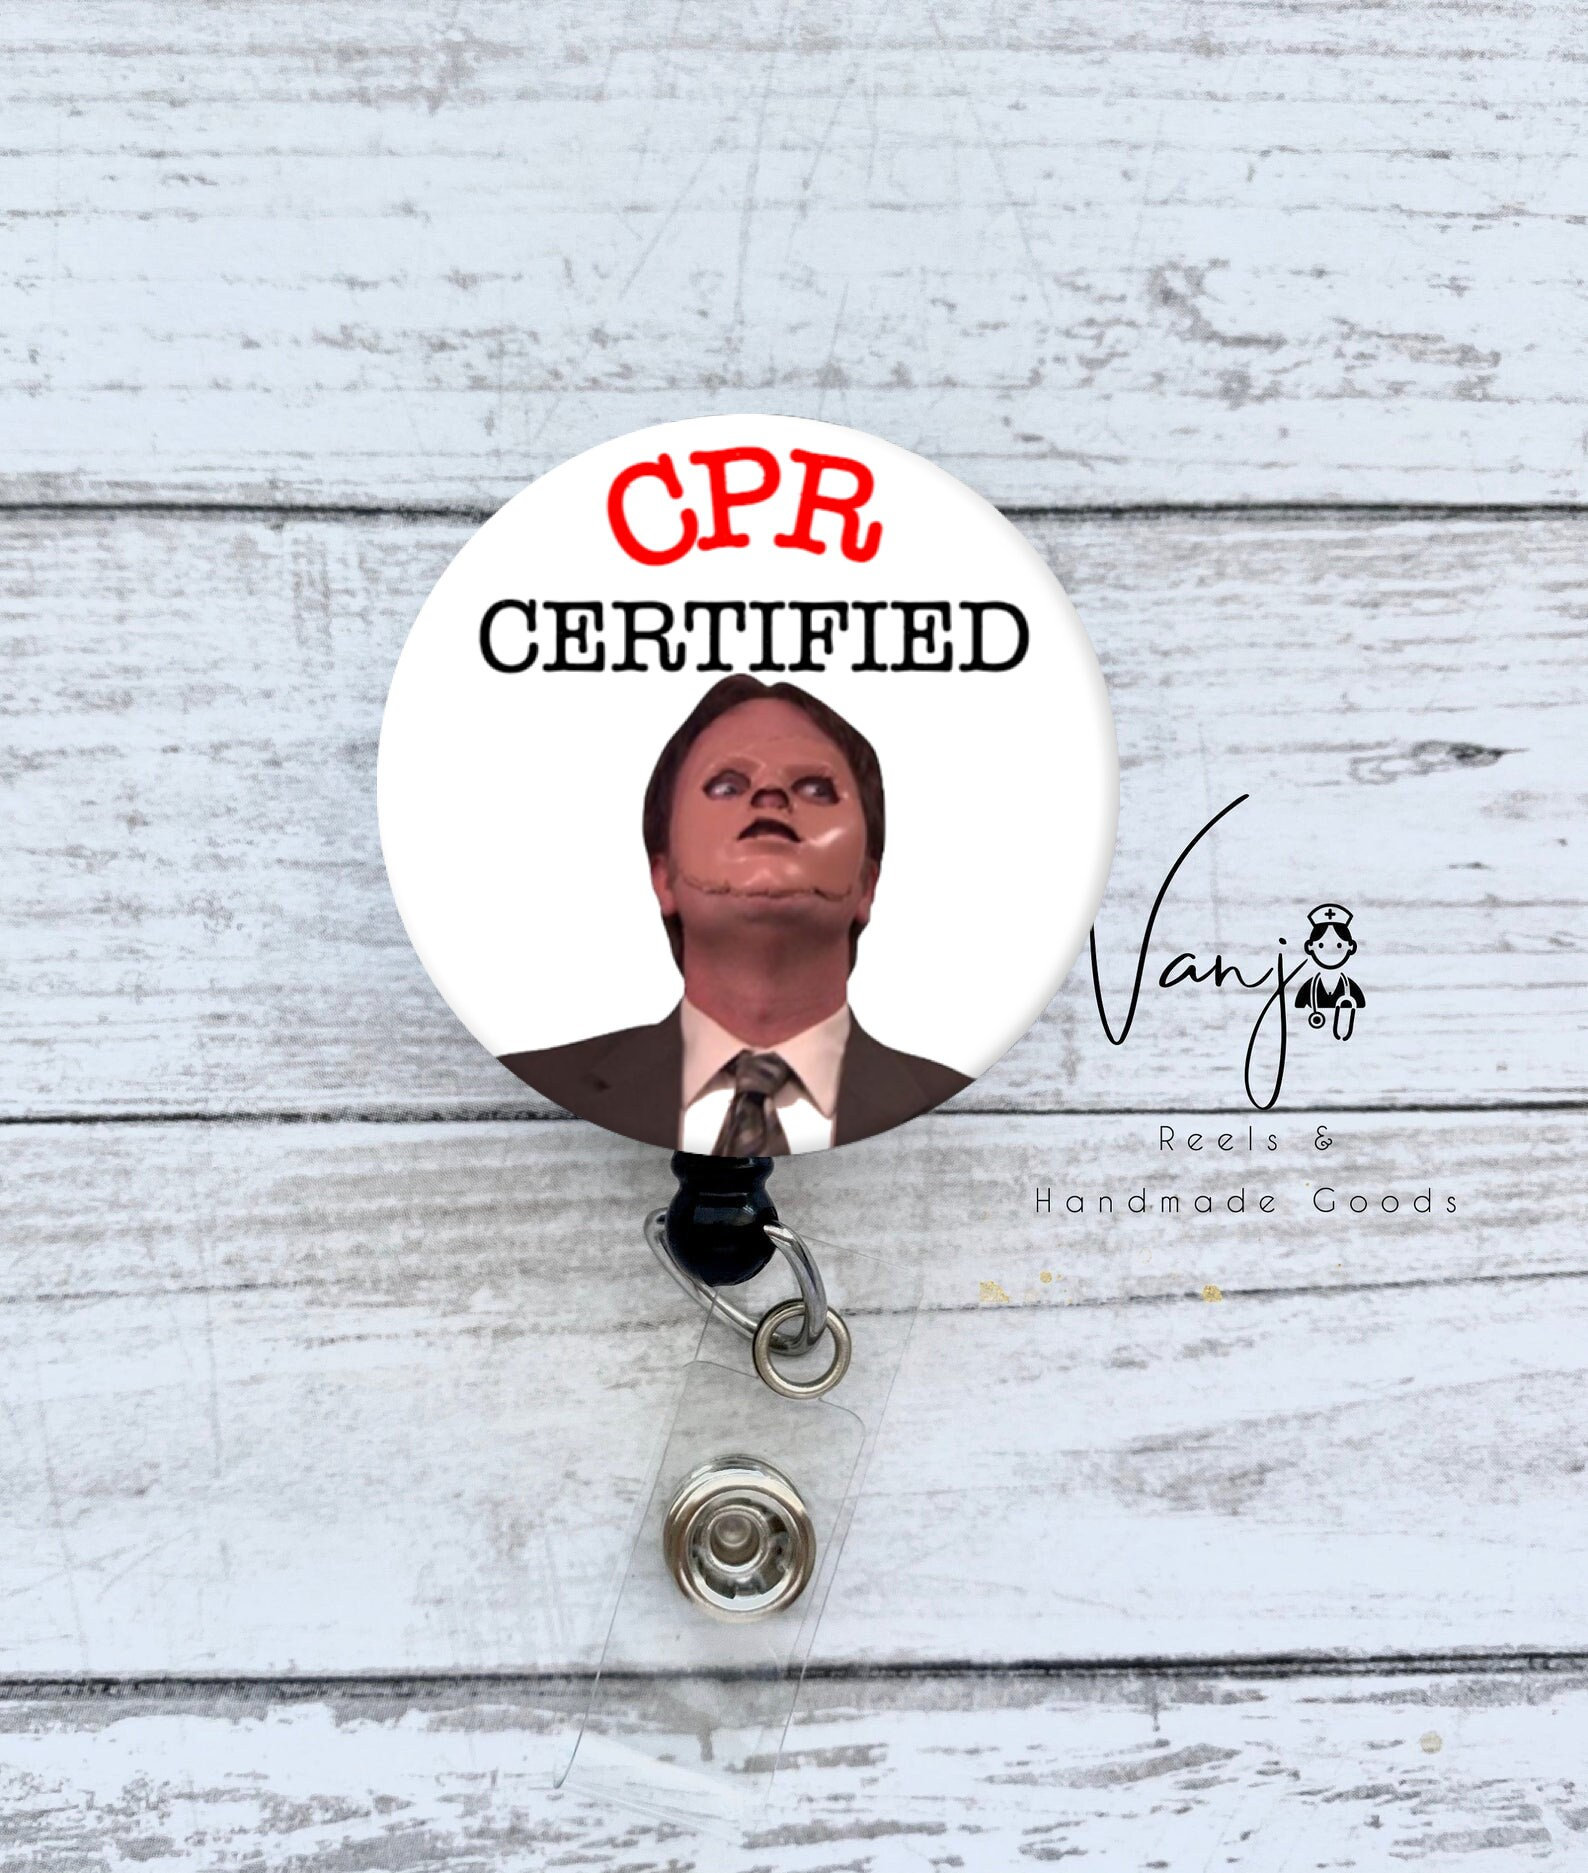 Embroidered Patch - First Aid AED CPR Trained 3.5 inch CUSTOMIZED for Your  Company